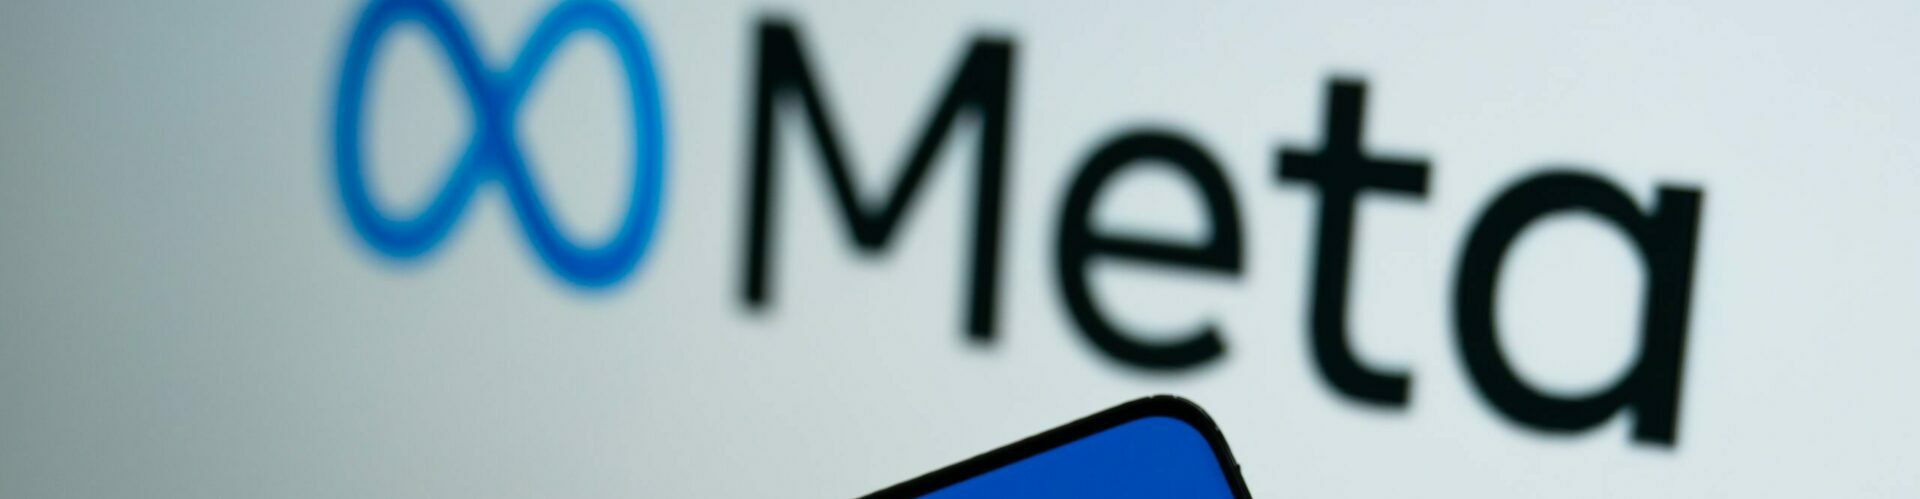 Bangkok, Thailand - October 29, 2021: Meta logo is shown on a device screen. Meta is the new corporate name of Facebook. Social media platform will change to Meta to emphasize its metaverse vision.